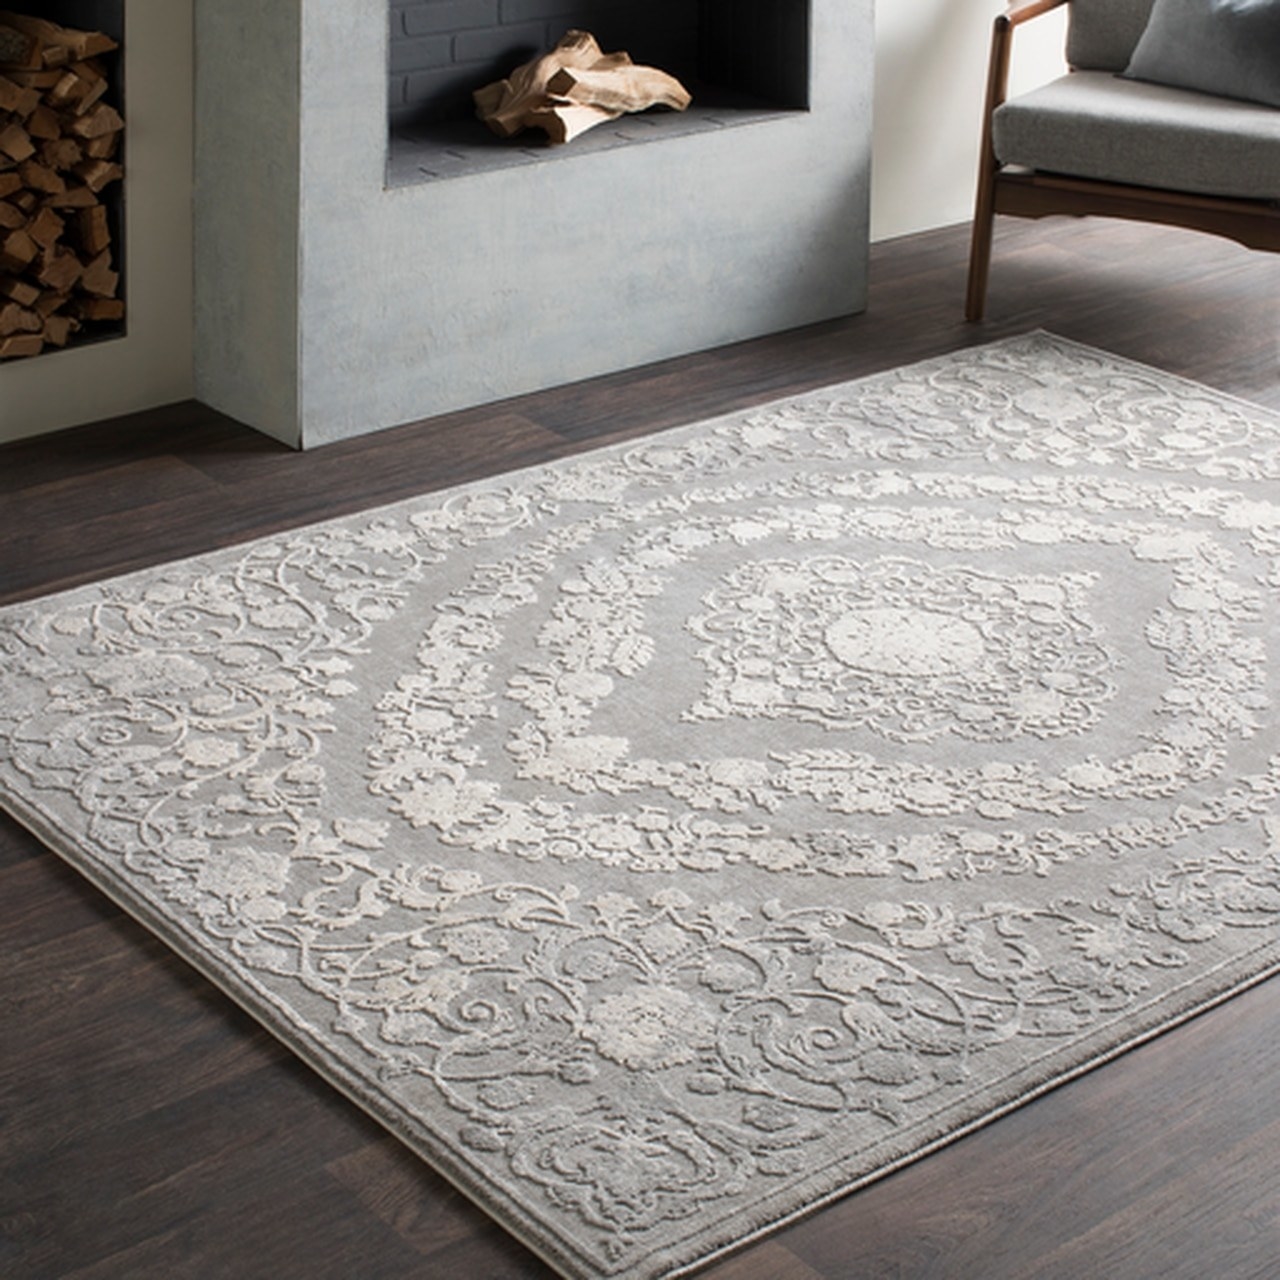 The grey carpet with embossed white floral medallion patterning